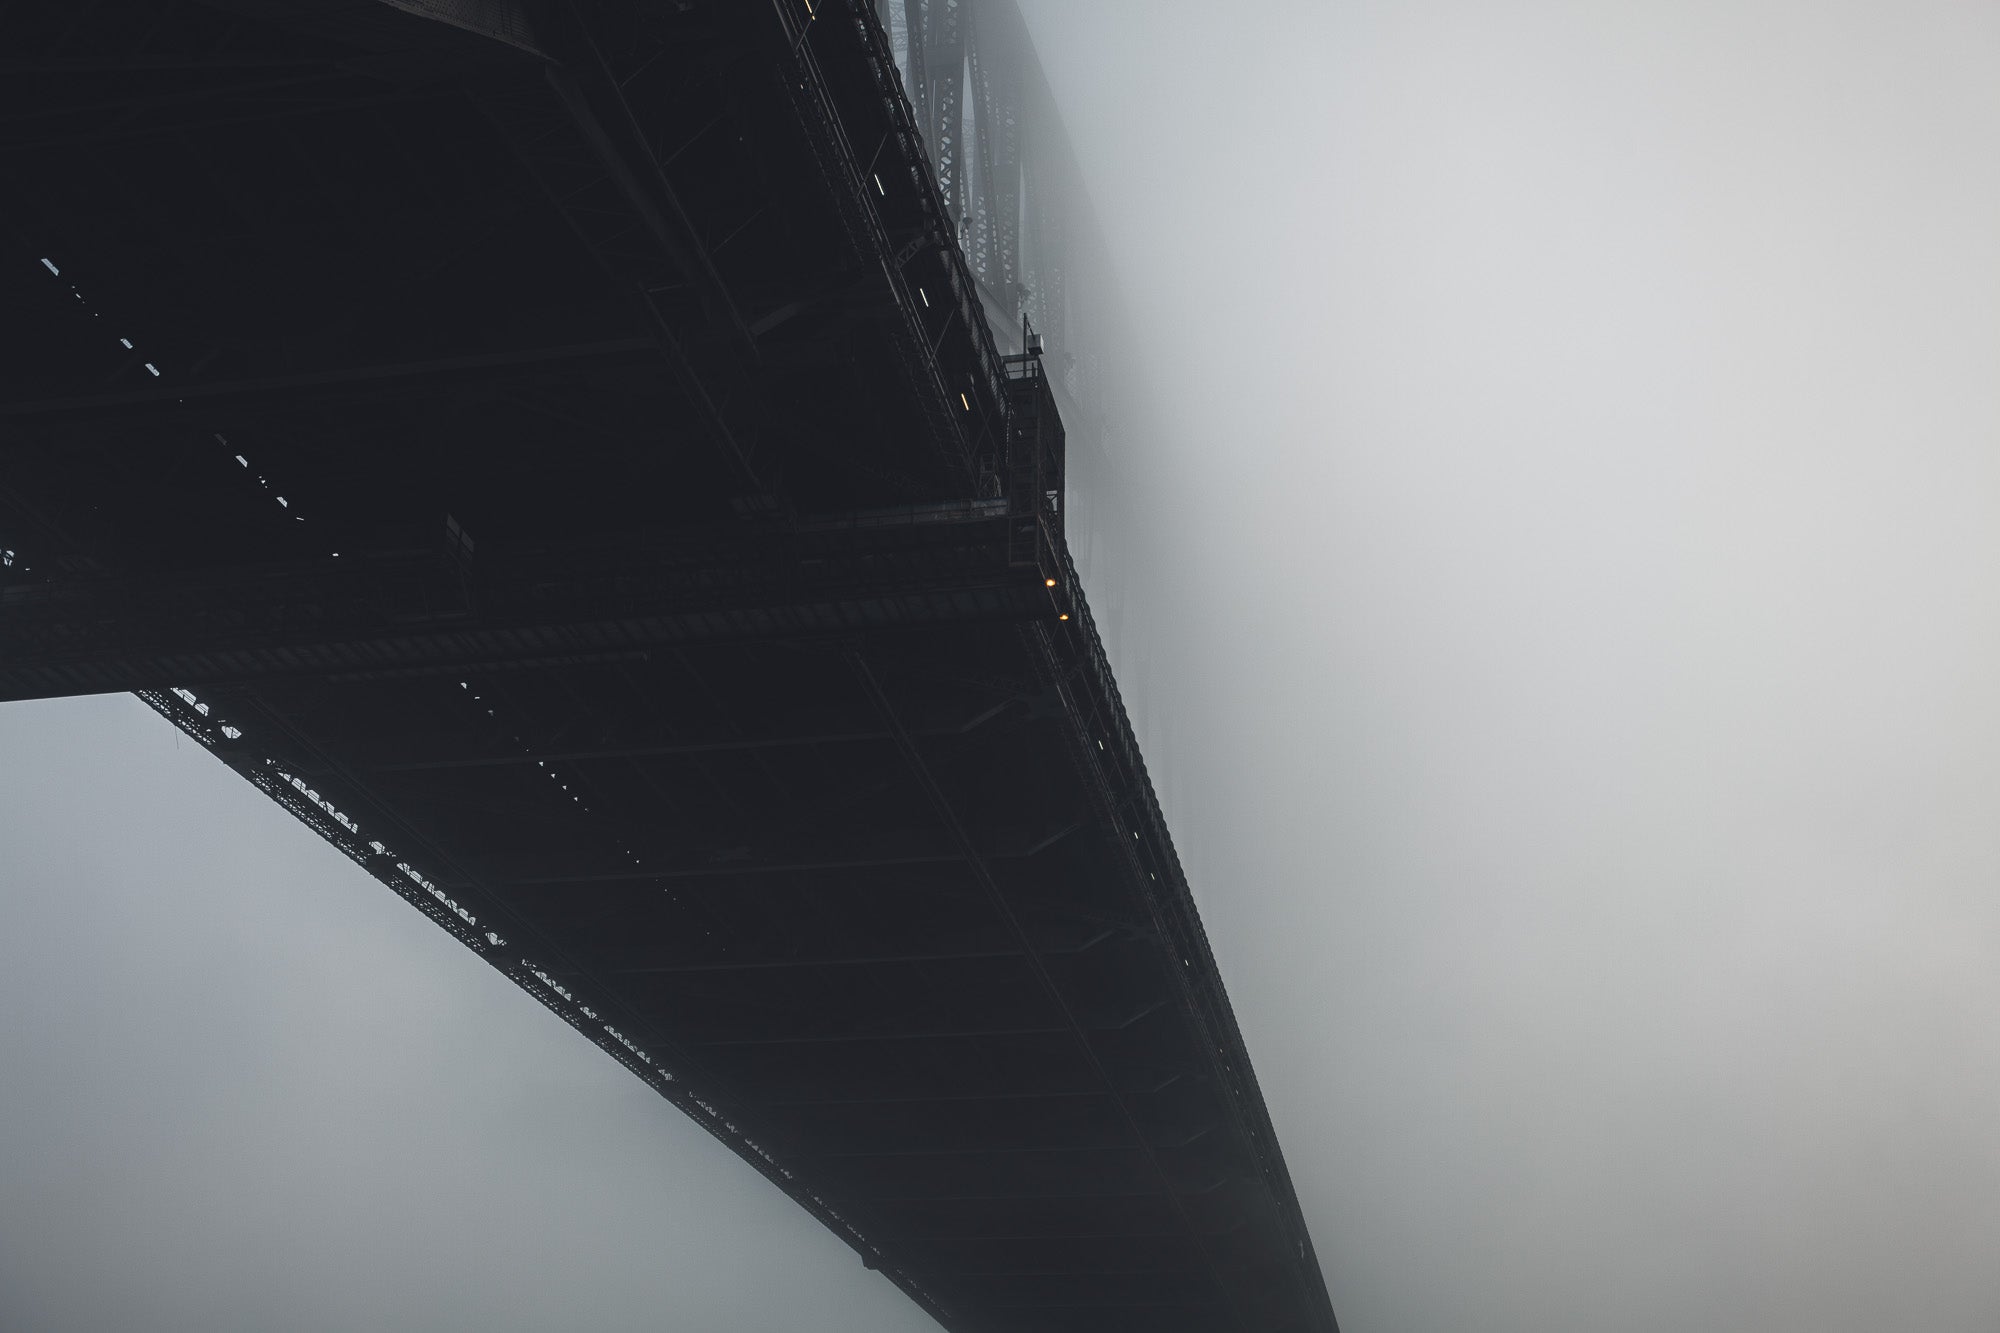 The Sydney Harbour Bridge partially obscured by fog, with its arch and lights fading into the white mist.